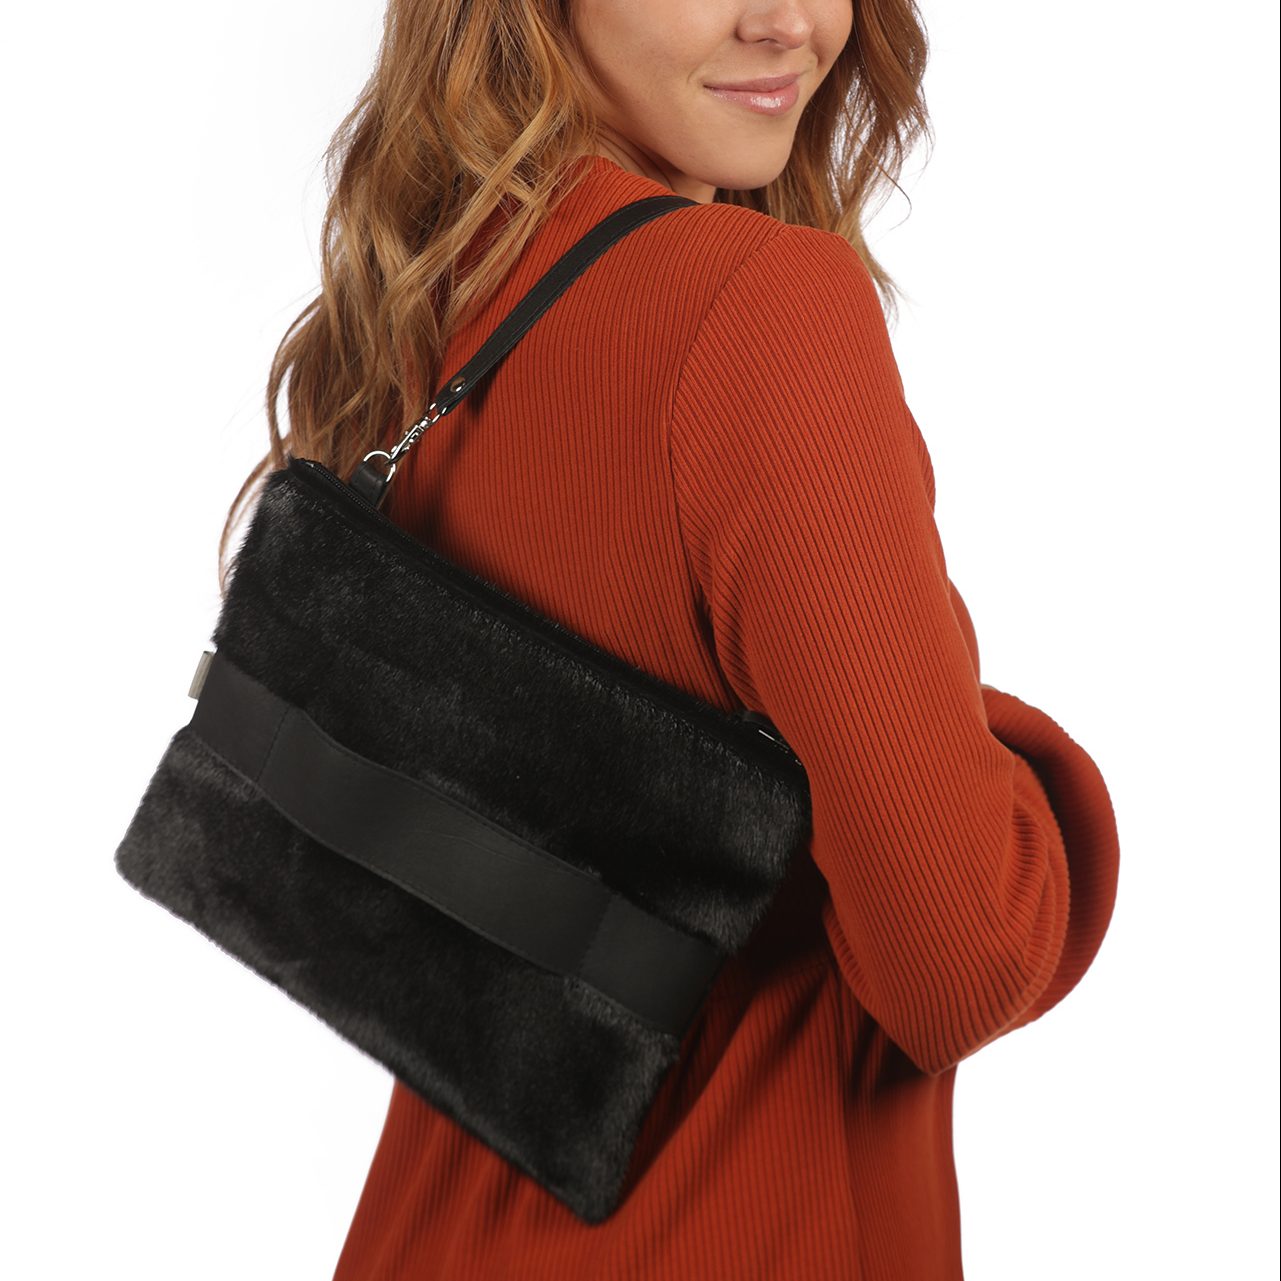 Minimalist small shoulder pouch in leather VENISE model – Veinage